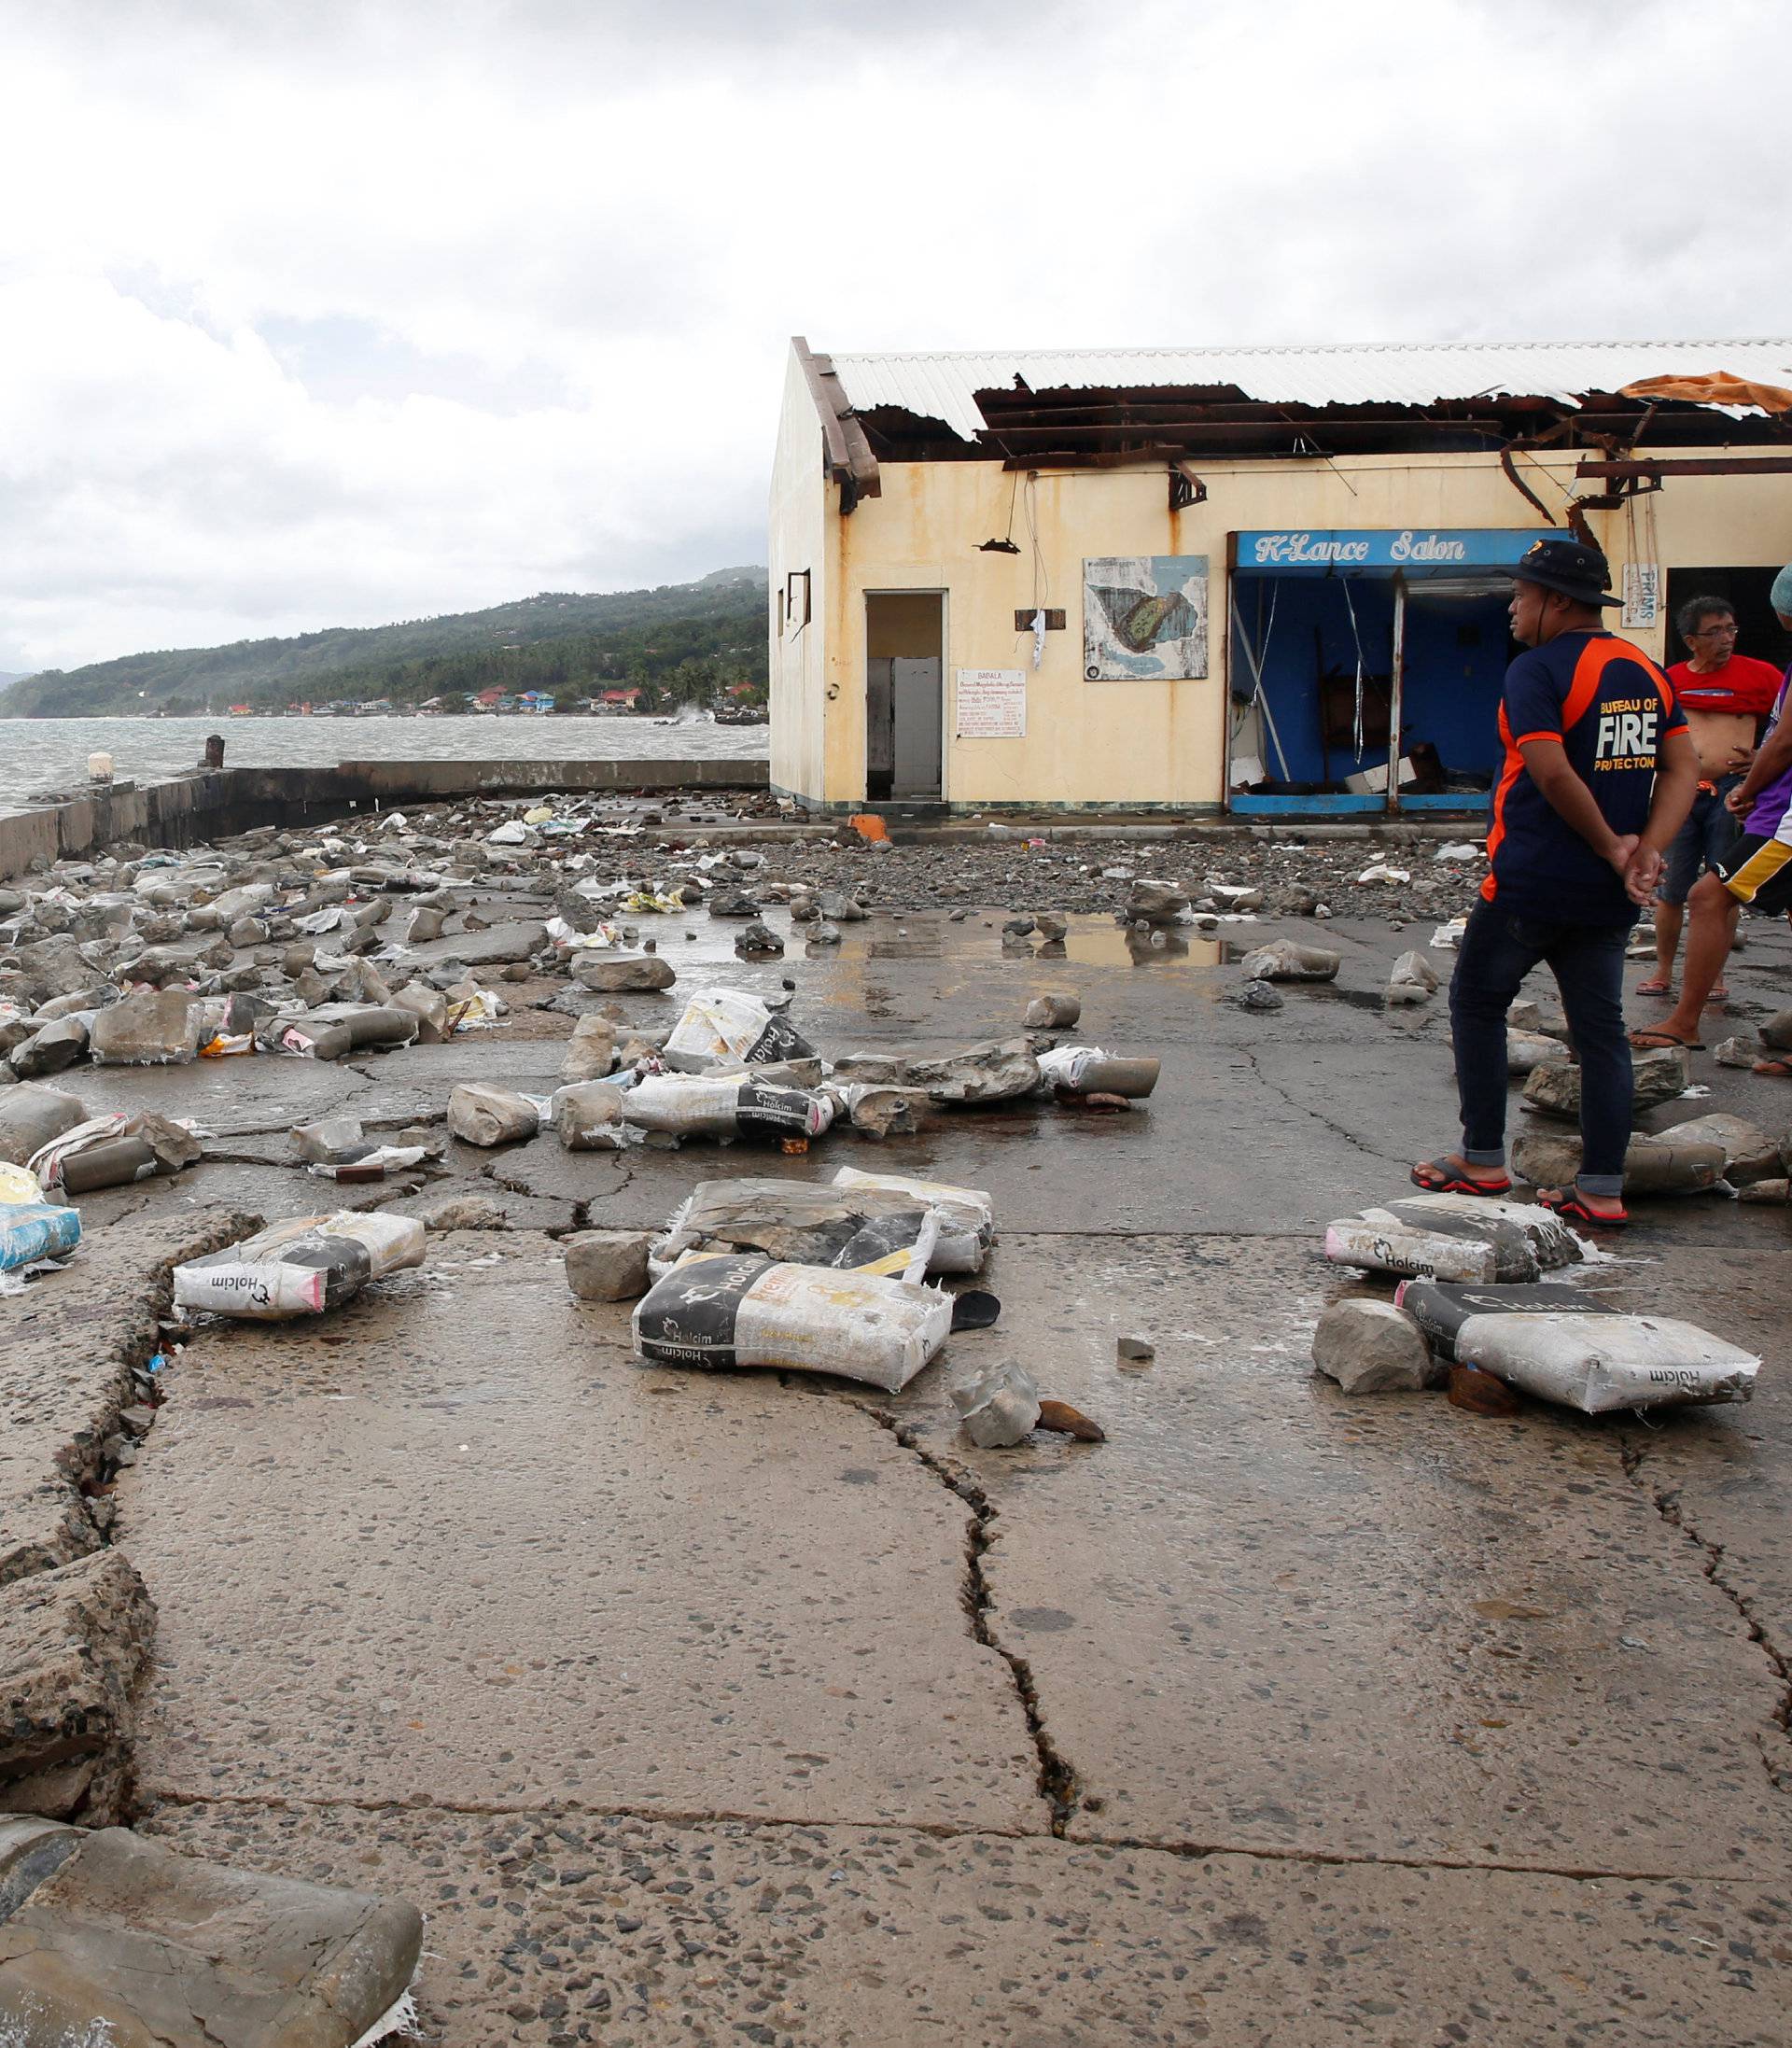 Residents gather in a partially damaged port in Mabini, Batangas, after it was hit by Typhoon Nock-Ten